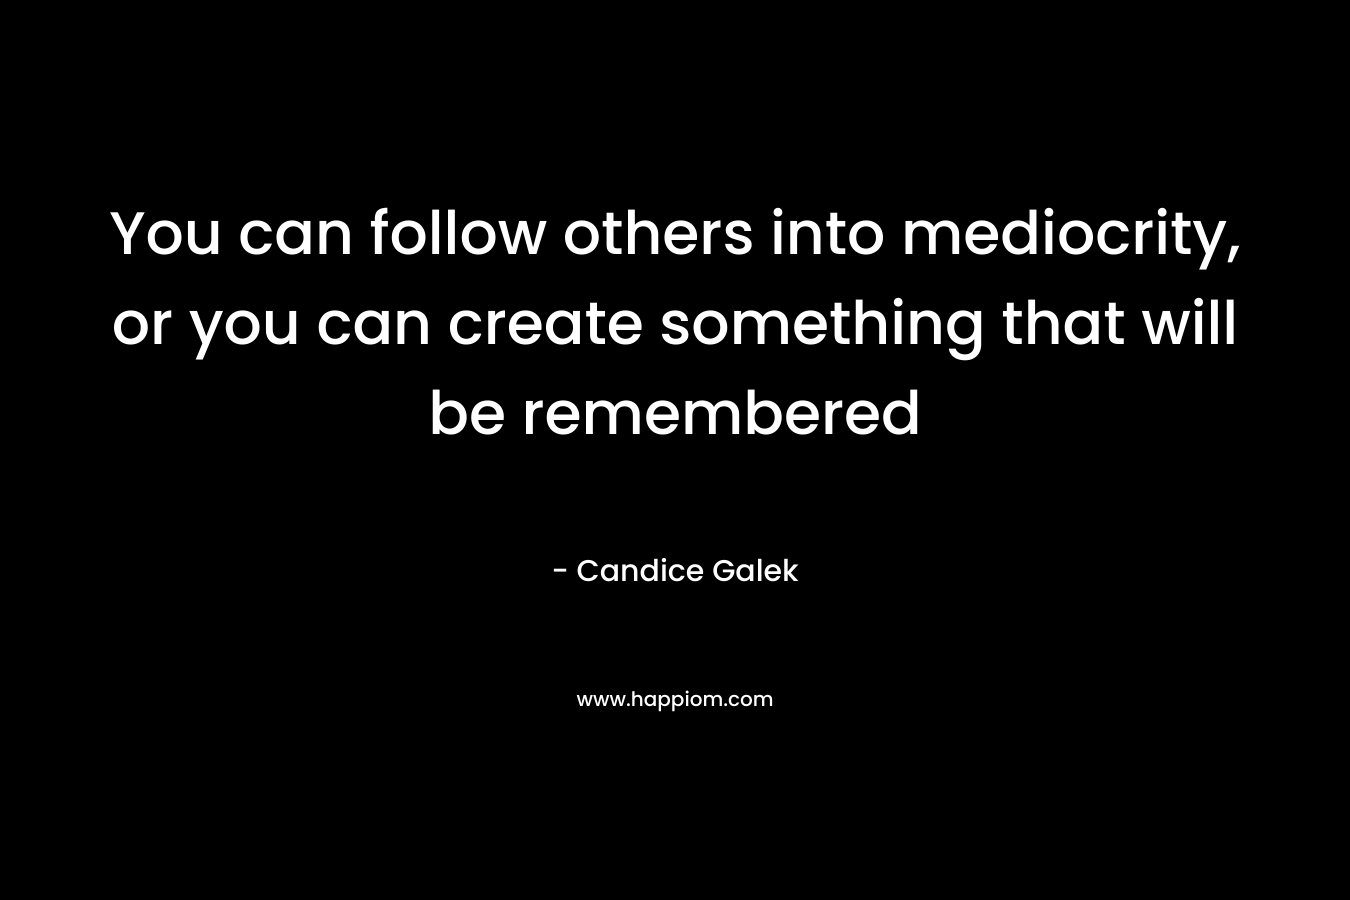 You can follow others into mediocrity, or you can create something that will be remembered – Candice Galek